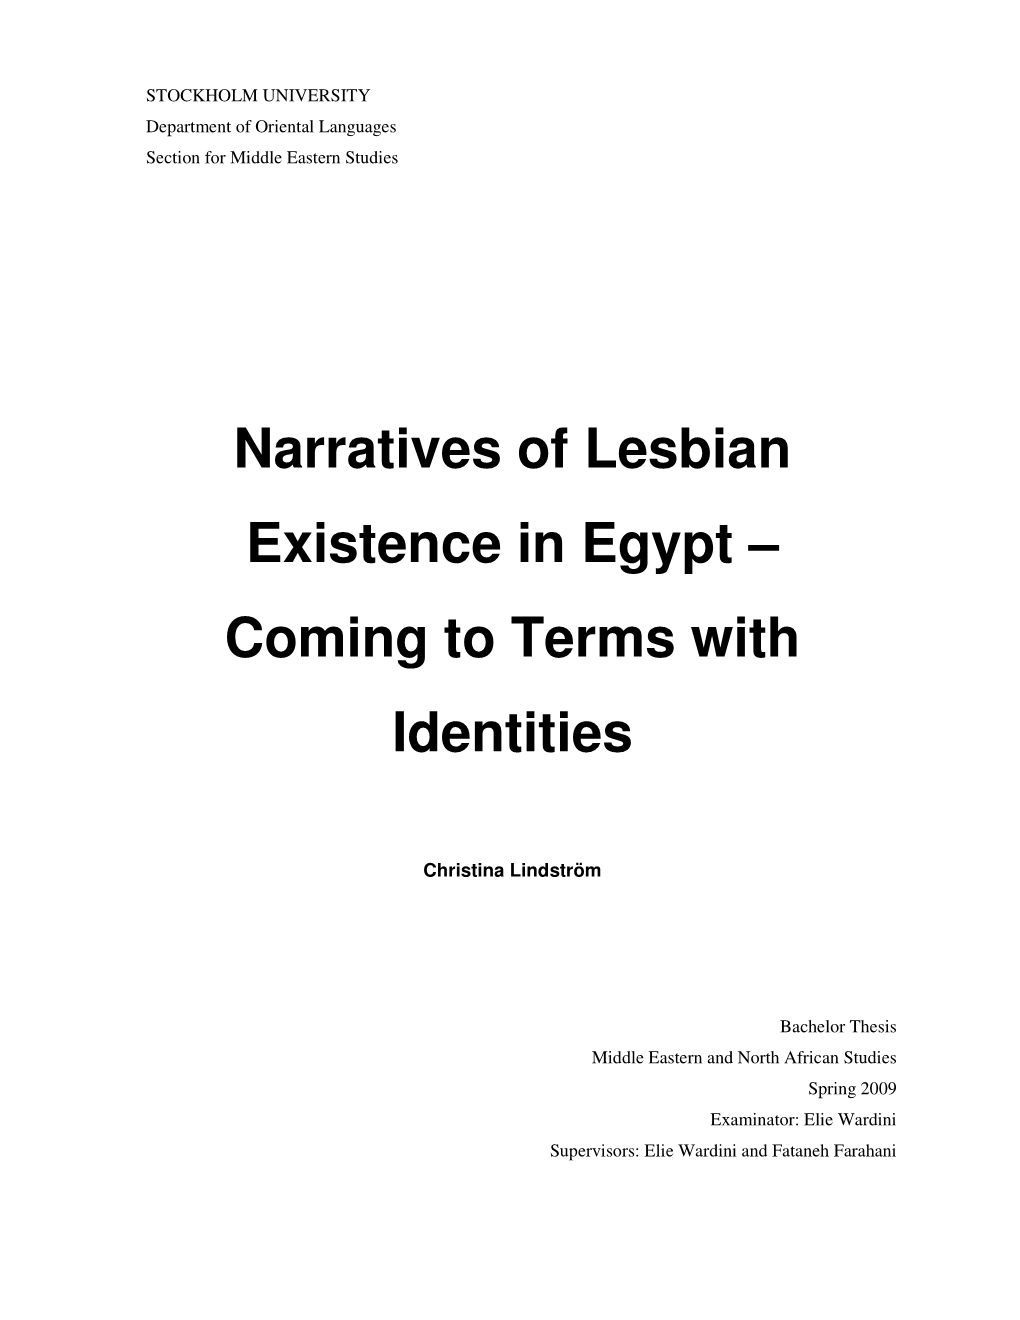 Narratives of Lesbian Existence in Egypt – Coming to Terms with Identities